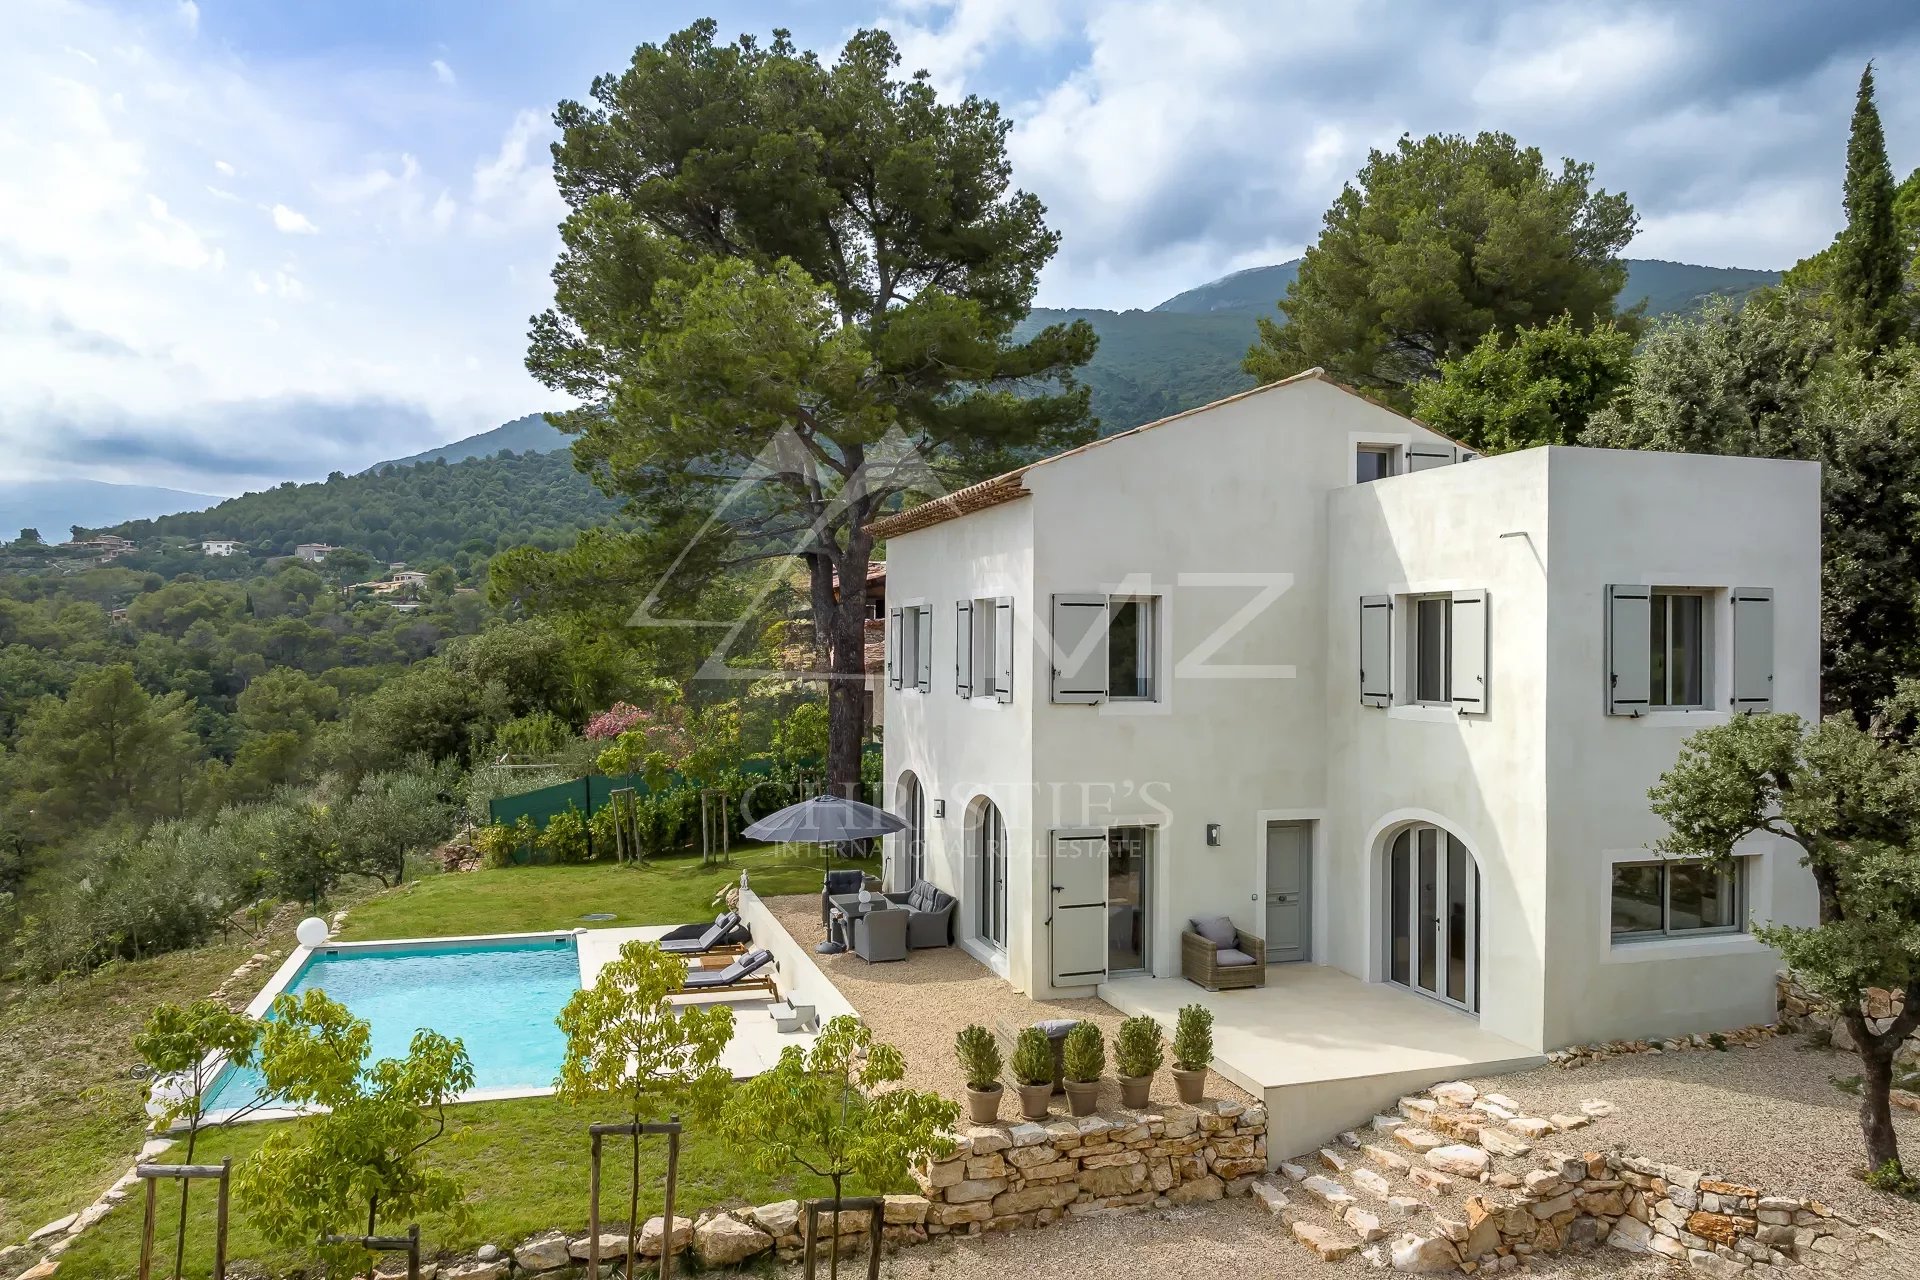 Close to Saint-Paul-de-Vence - Beautiful contemporary style property in a residential area